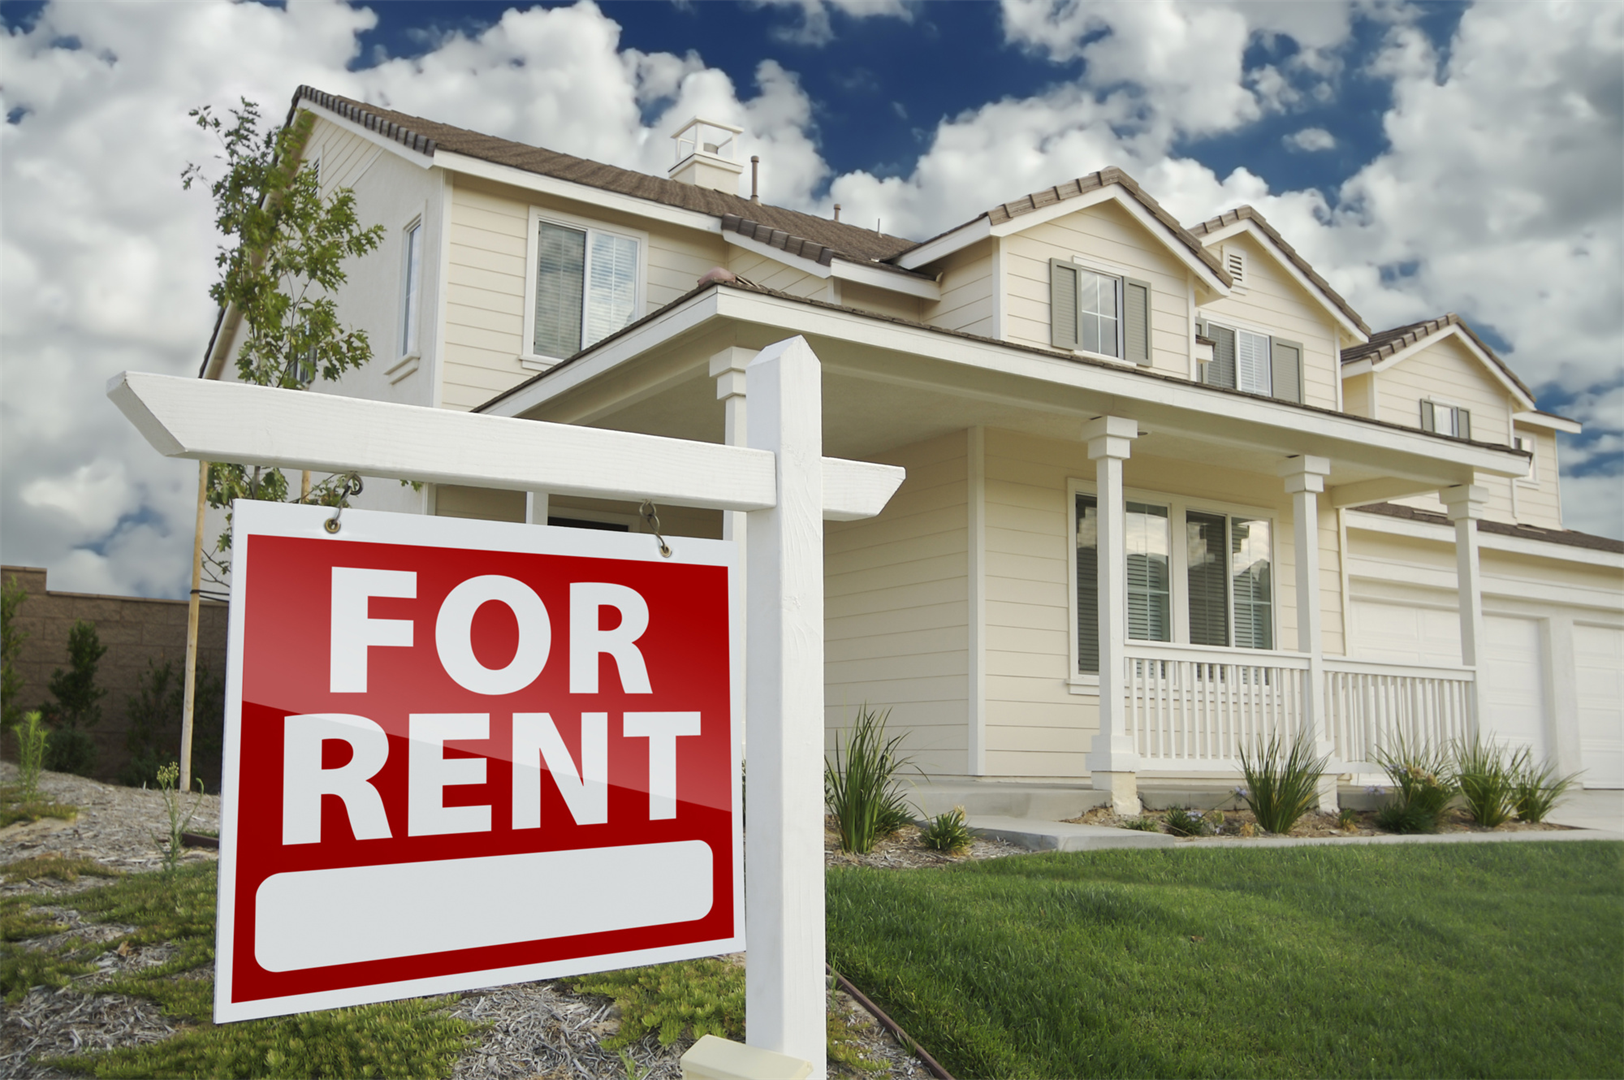 7 Survival Tips for Renting Your Home Hassle-Free